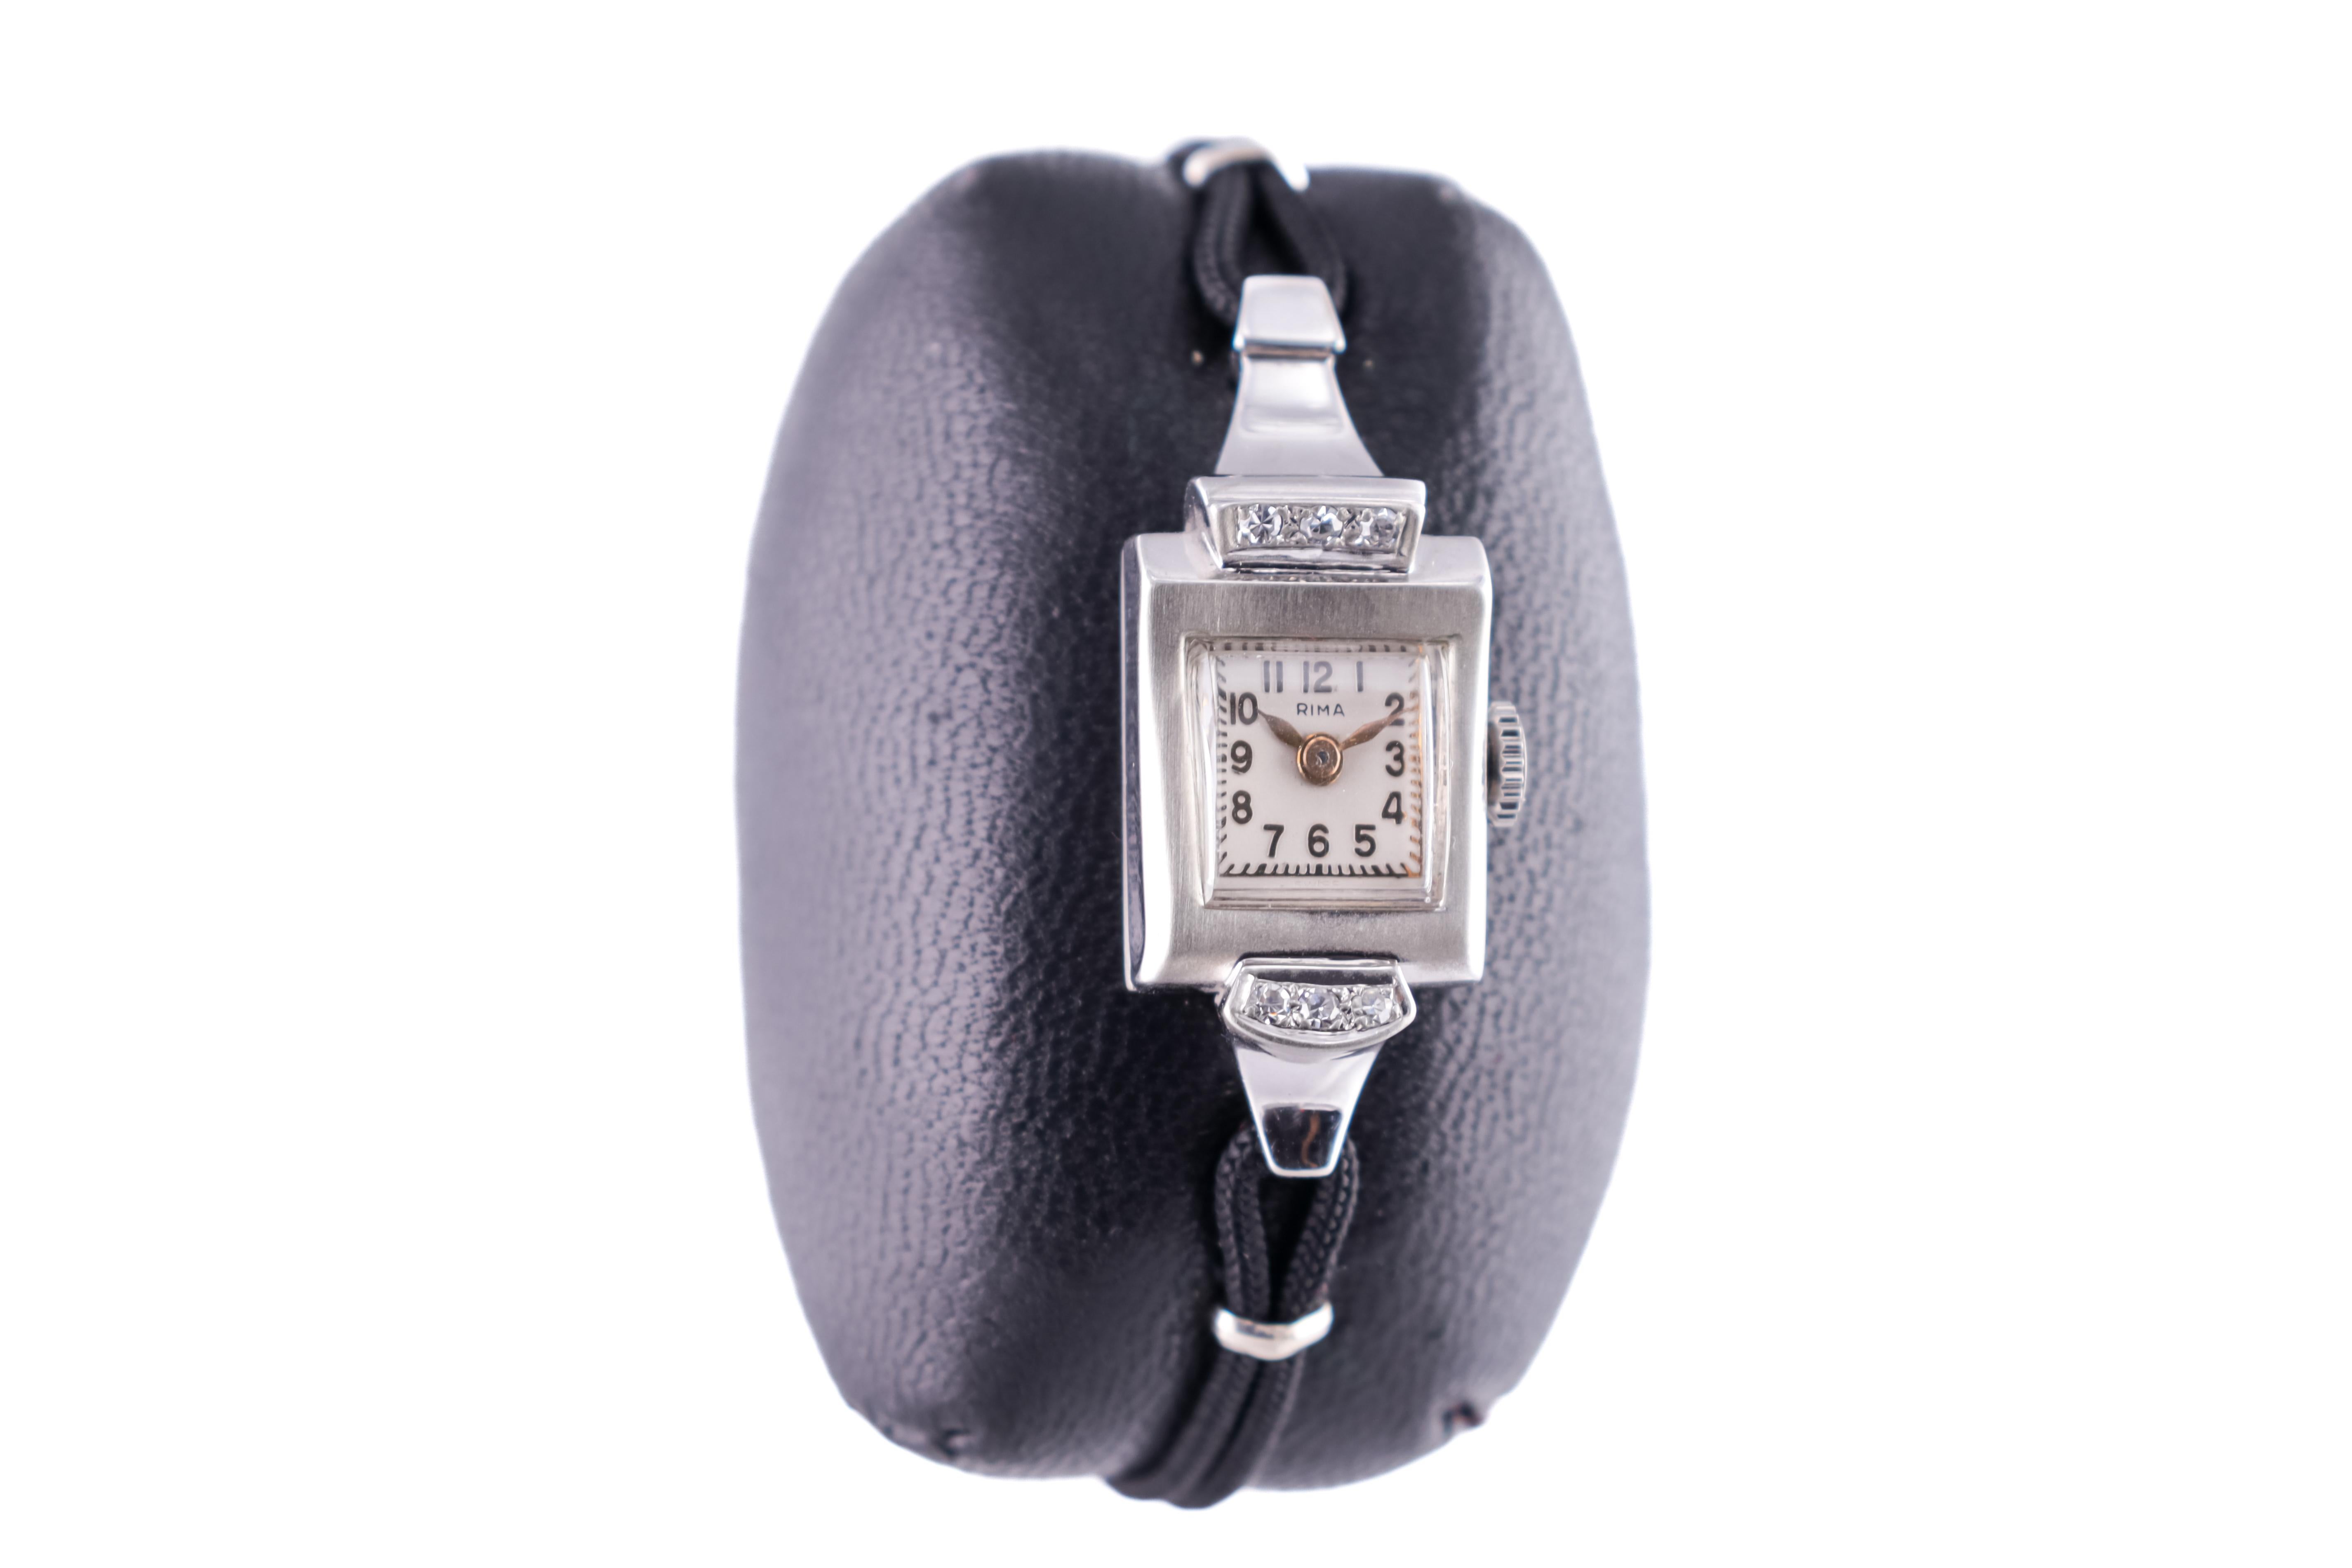 FACTORY / HOUSE: Rima Watch Company
STYLE / REFERENCE: Art Deco Dress Watch
METAL / MATERIAL: 14Kt. Solid Gold 
CIRCA / YEAR: 1940's
DIMENSIONS / SIZE: 36 Length X 13 Width
MOVEMENT / CALIBER: Manual Winding / 17 Jewels 
DIAL / HANDS:  Original